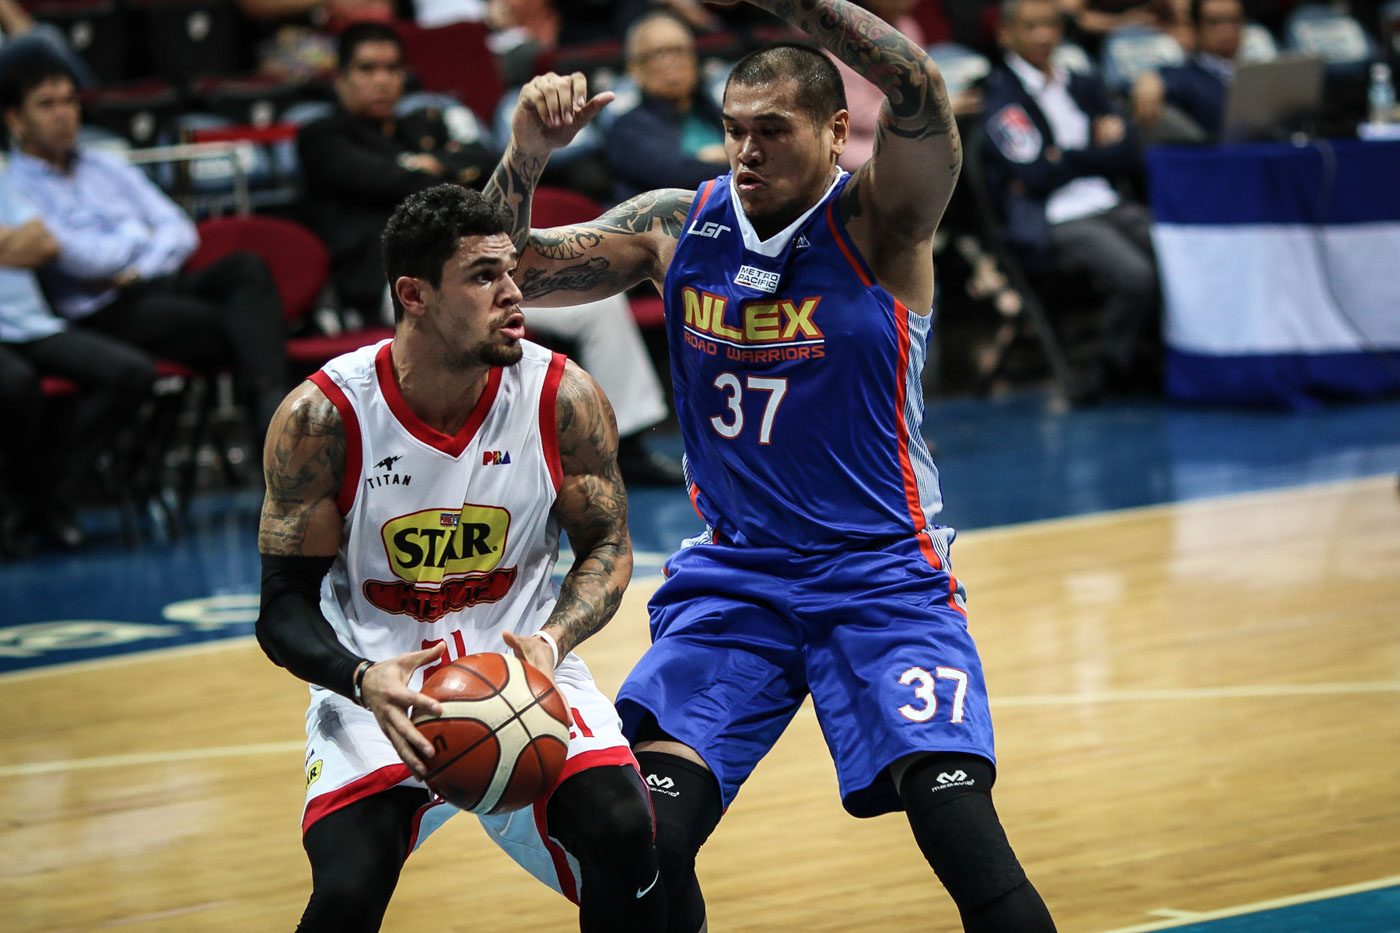 Hotshots defense proves to be key in quarterfinals win